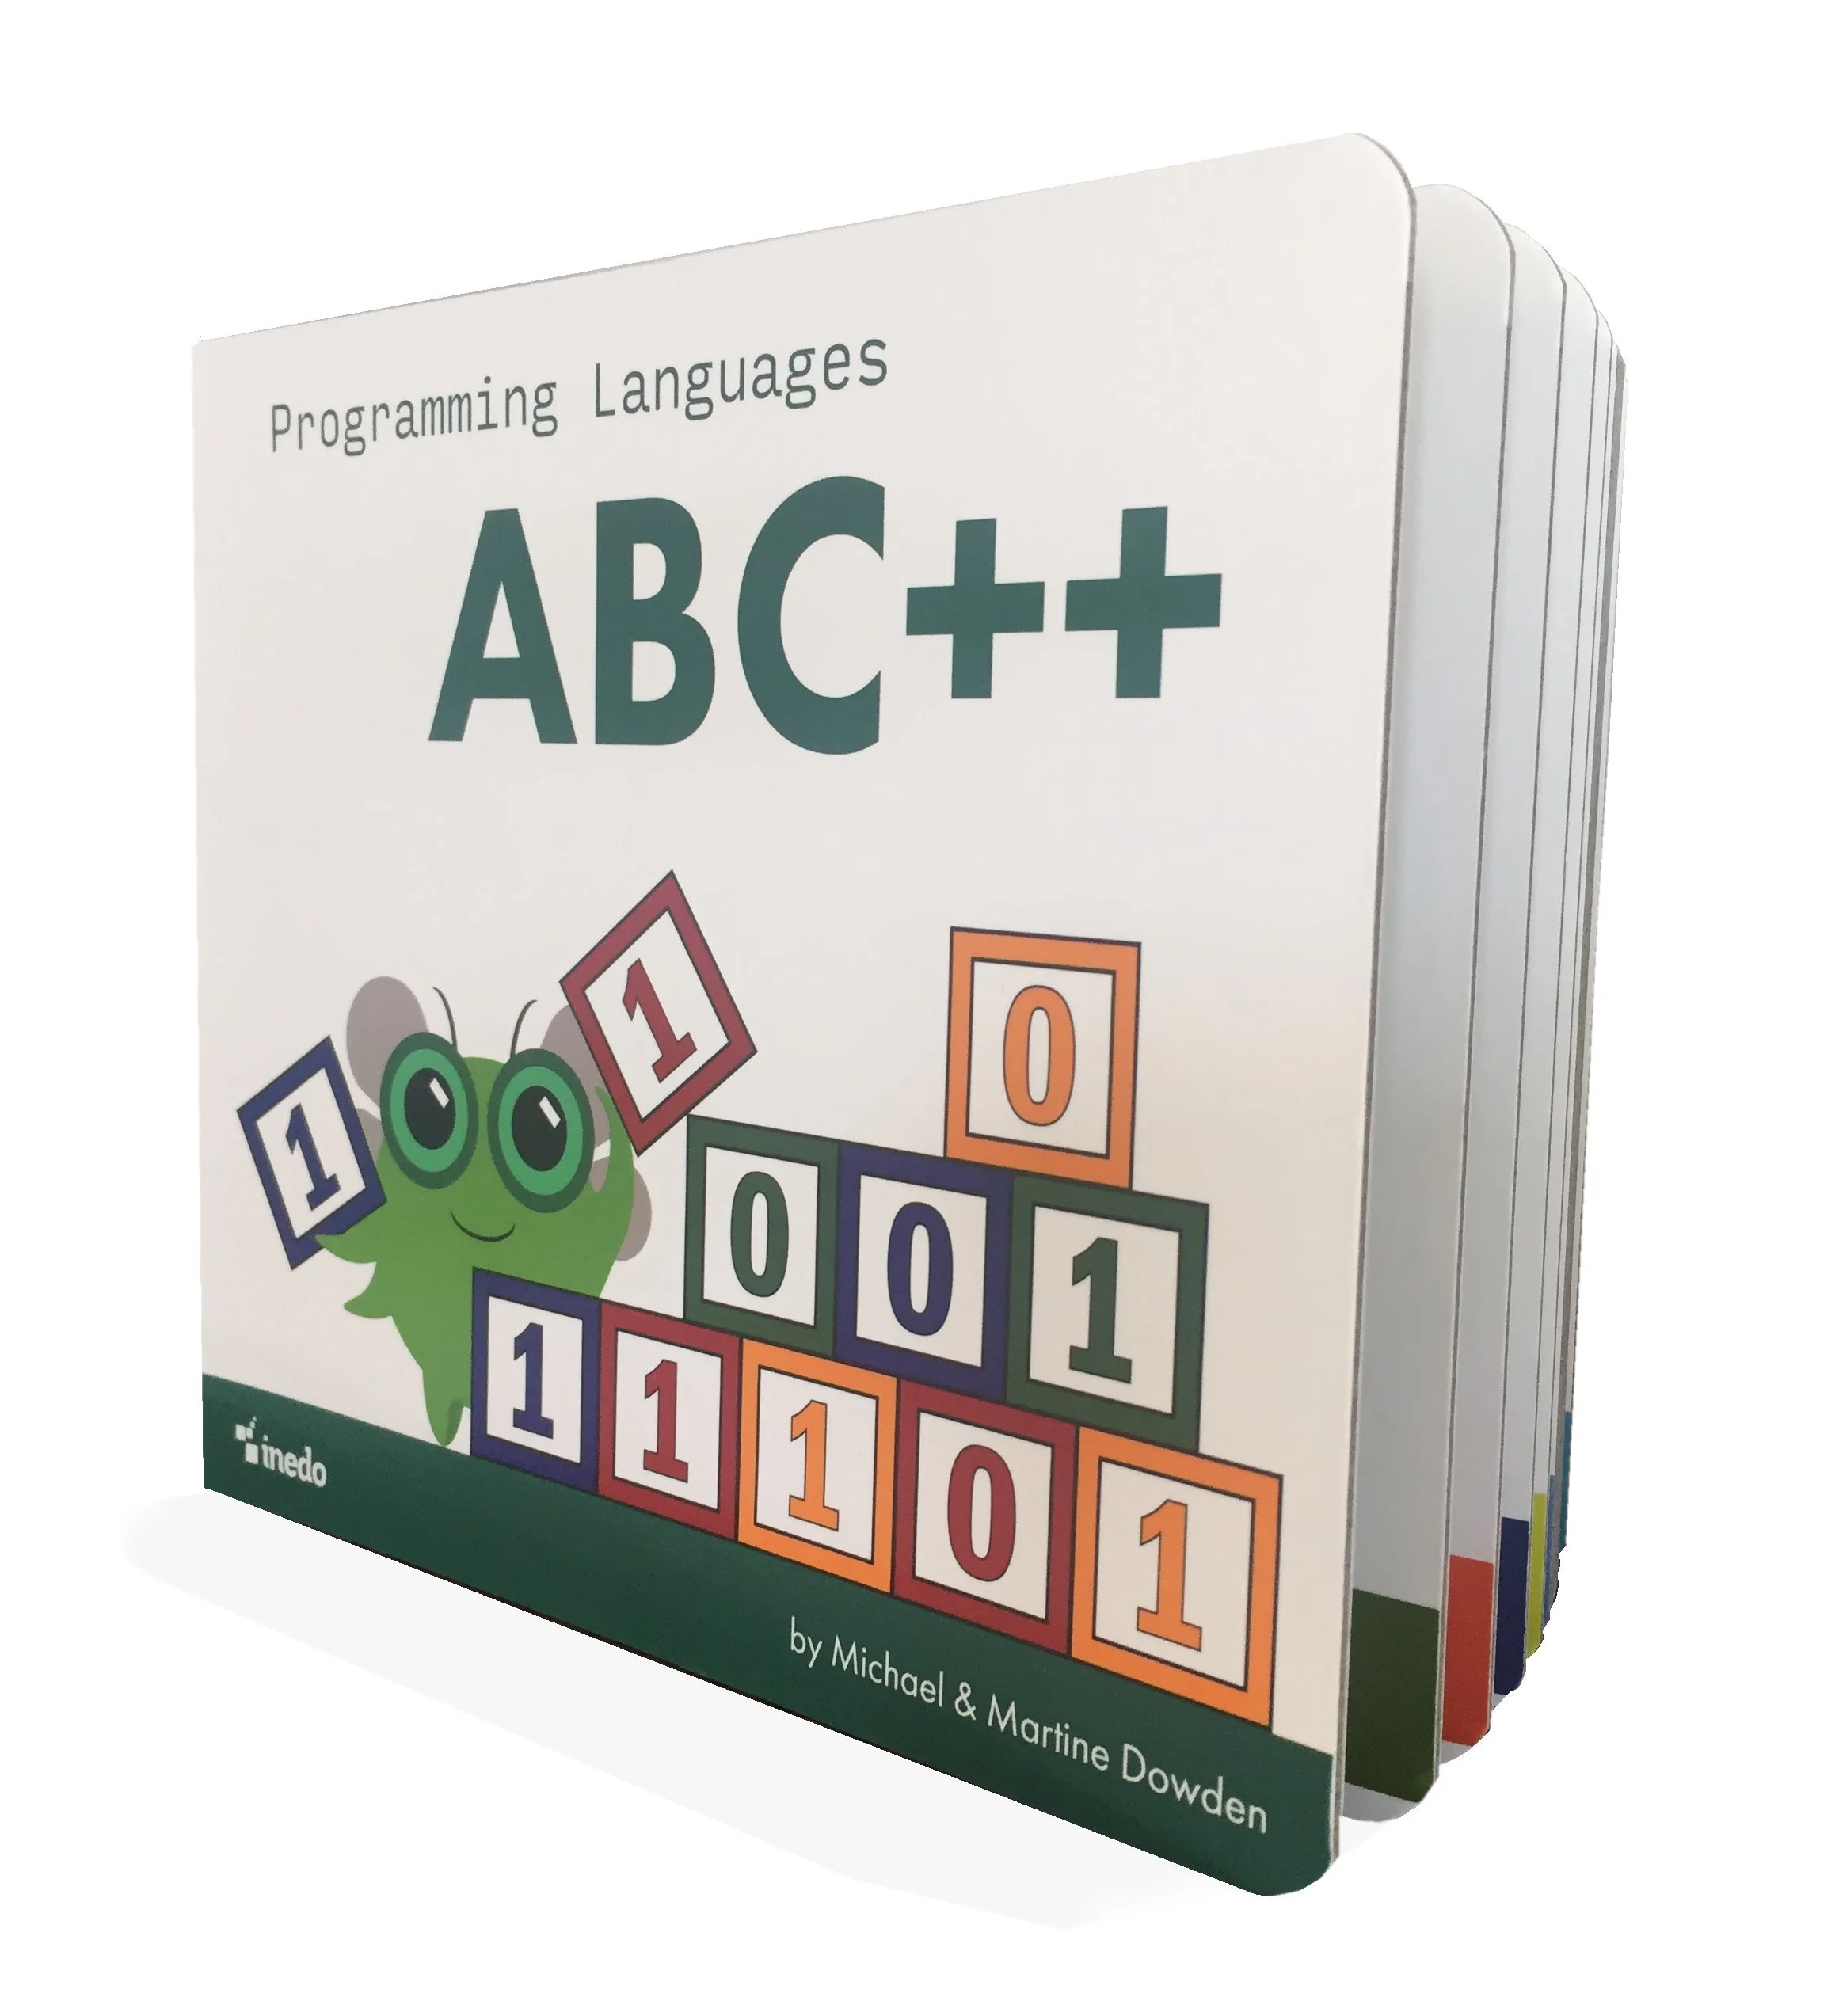 Programming Languages ABC++ book showing the cover which states the title and portrays a green bug playing with cubes with numbers 1 and 0 on them. The bottom of the cover shows the authors Michael and Martine Dowden and the publisher Inedo.